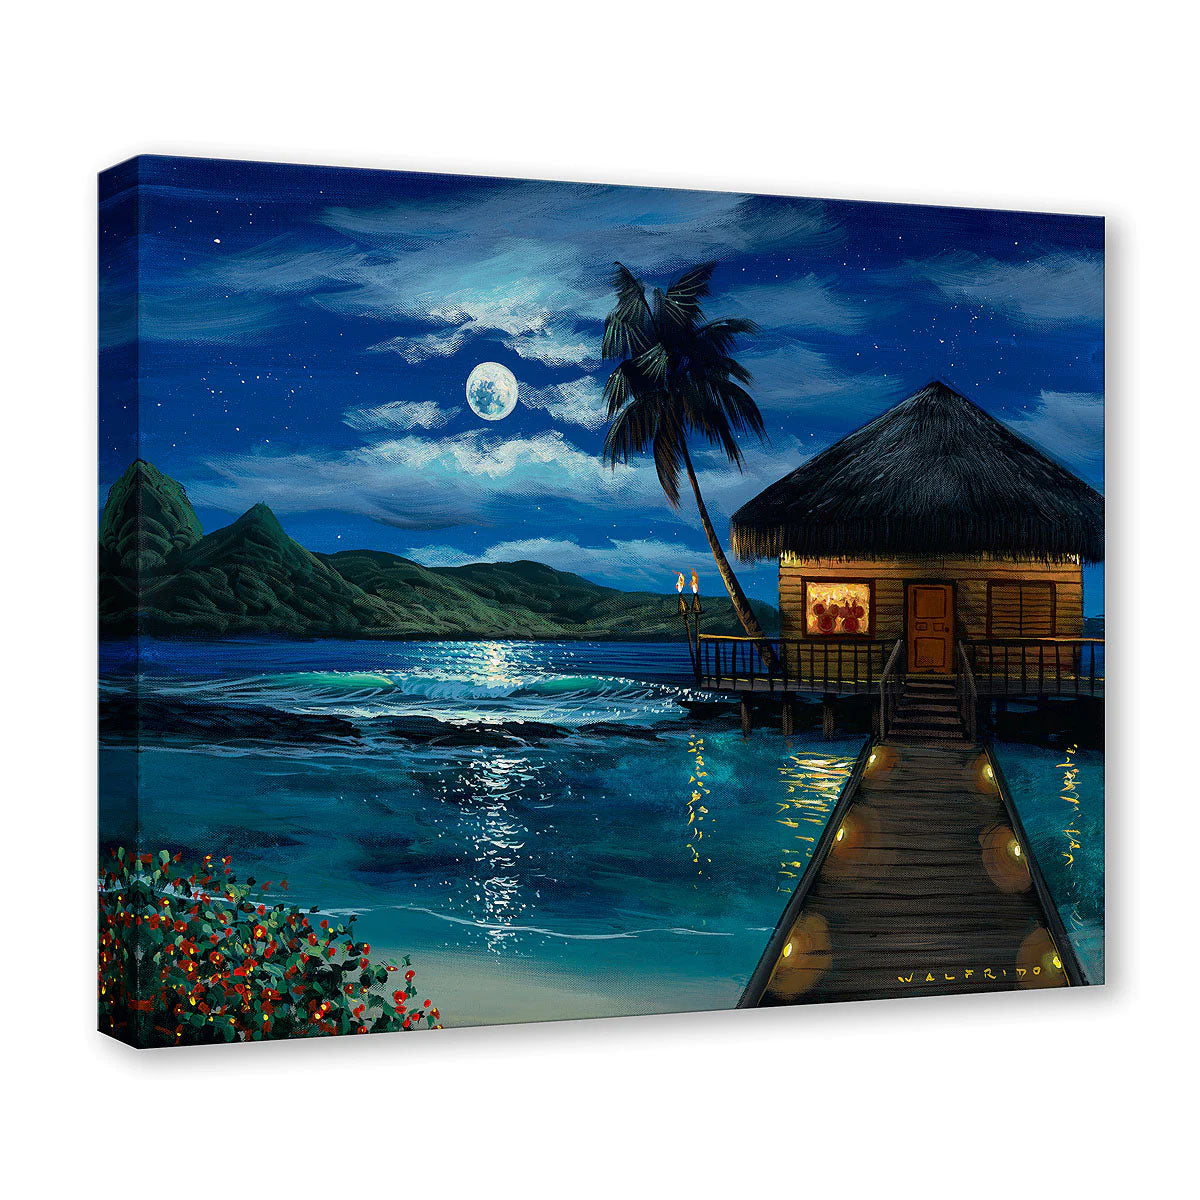 Walfrido Garcia "Moonlit Bungalow" Limited Edition Canvas Giclee